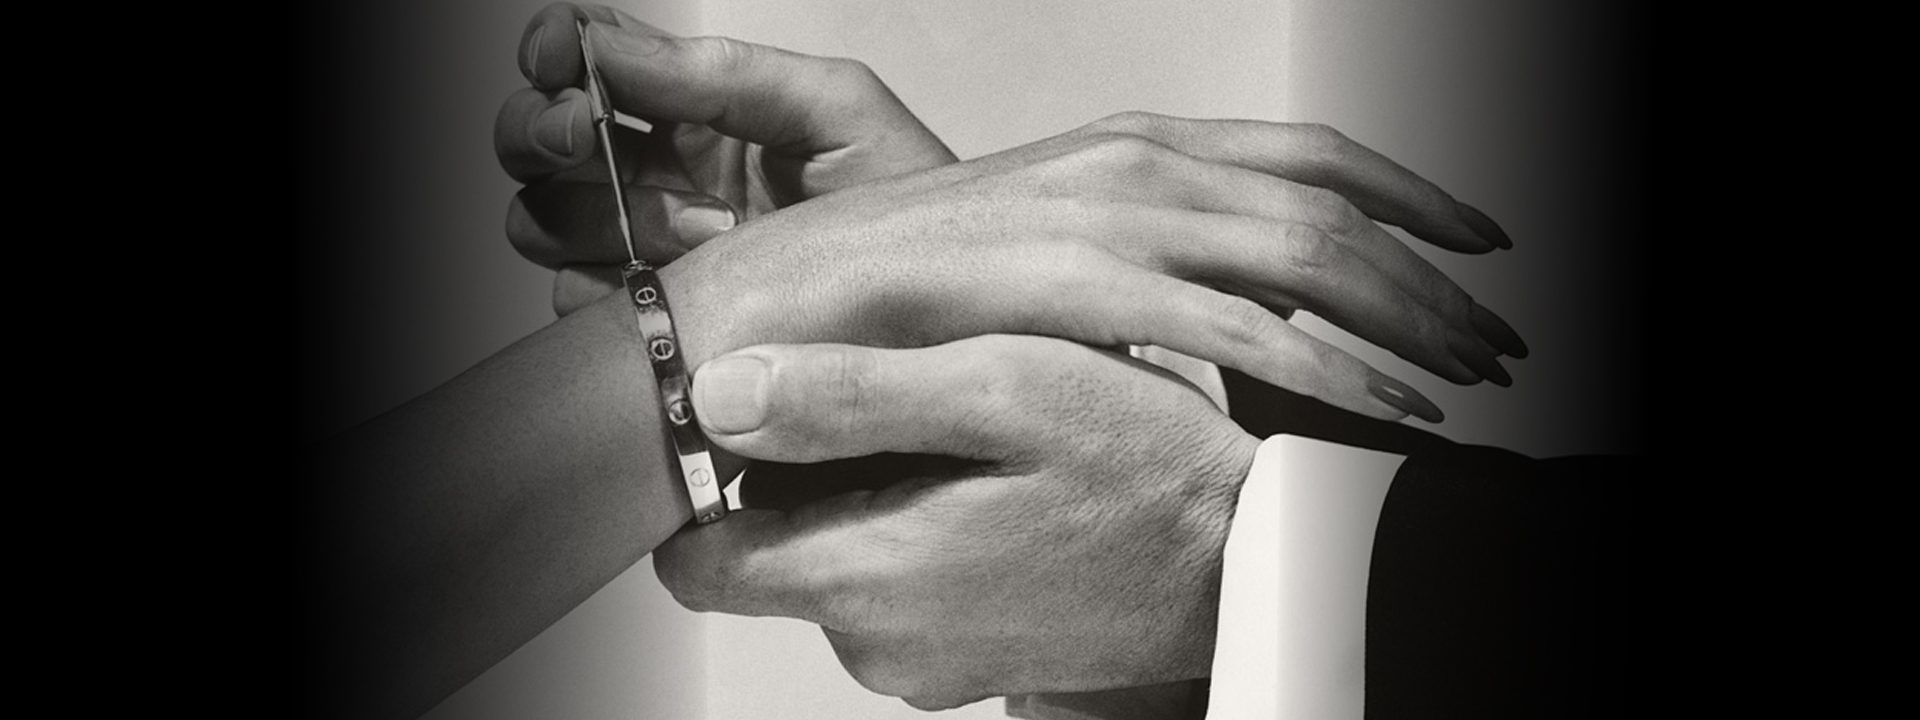 Man fastening a Cartier LOVE bracelet on a woman’s wrist with the Cartier screwdriver.